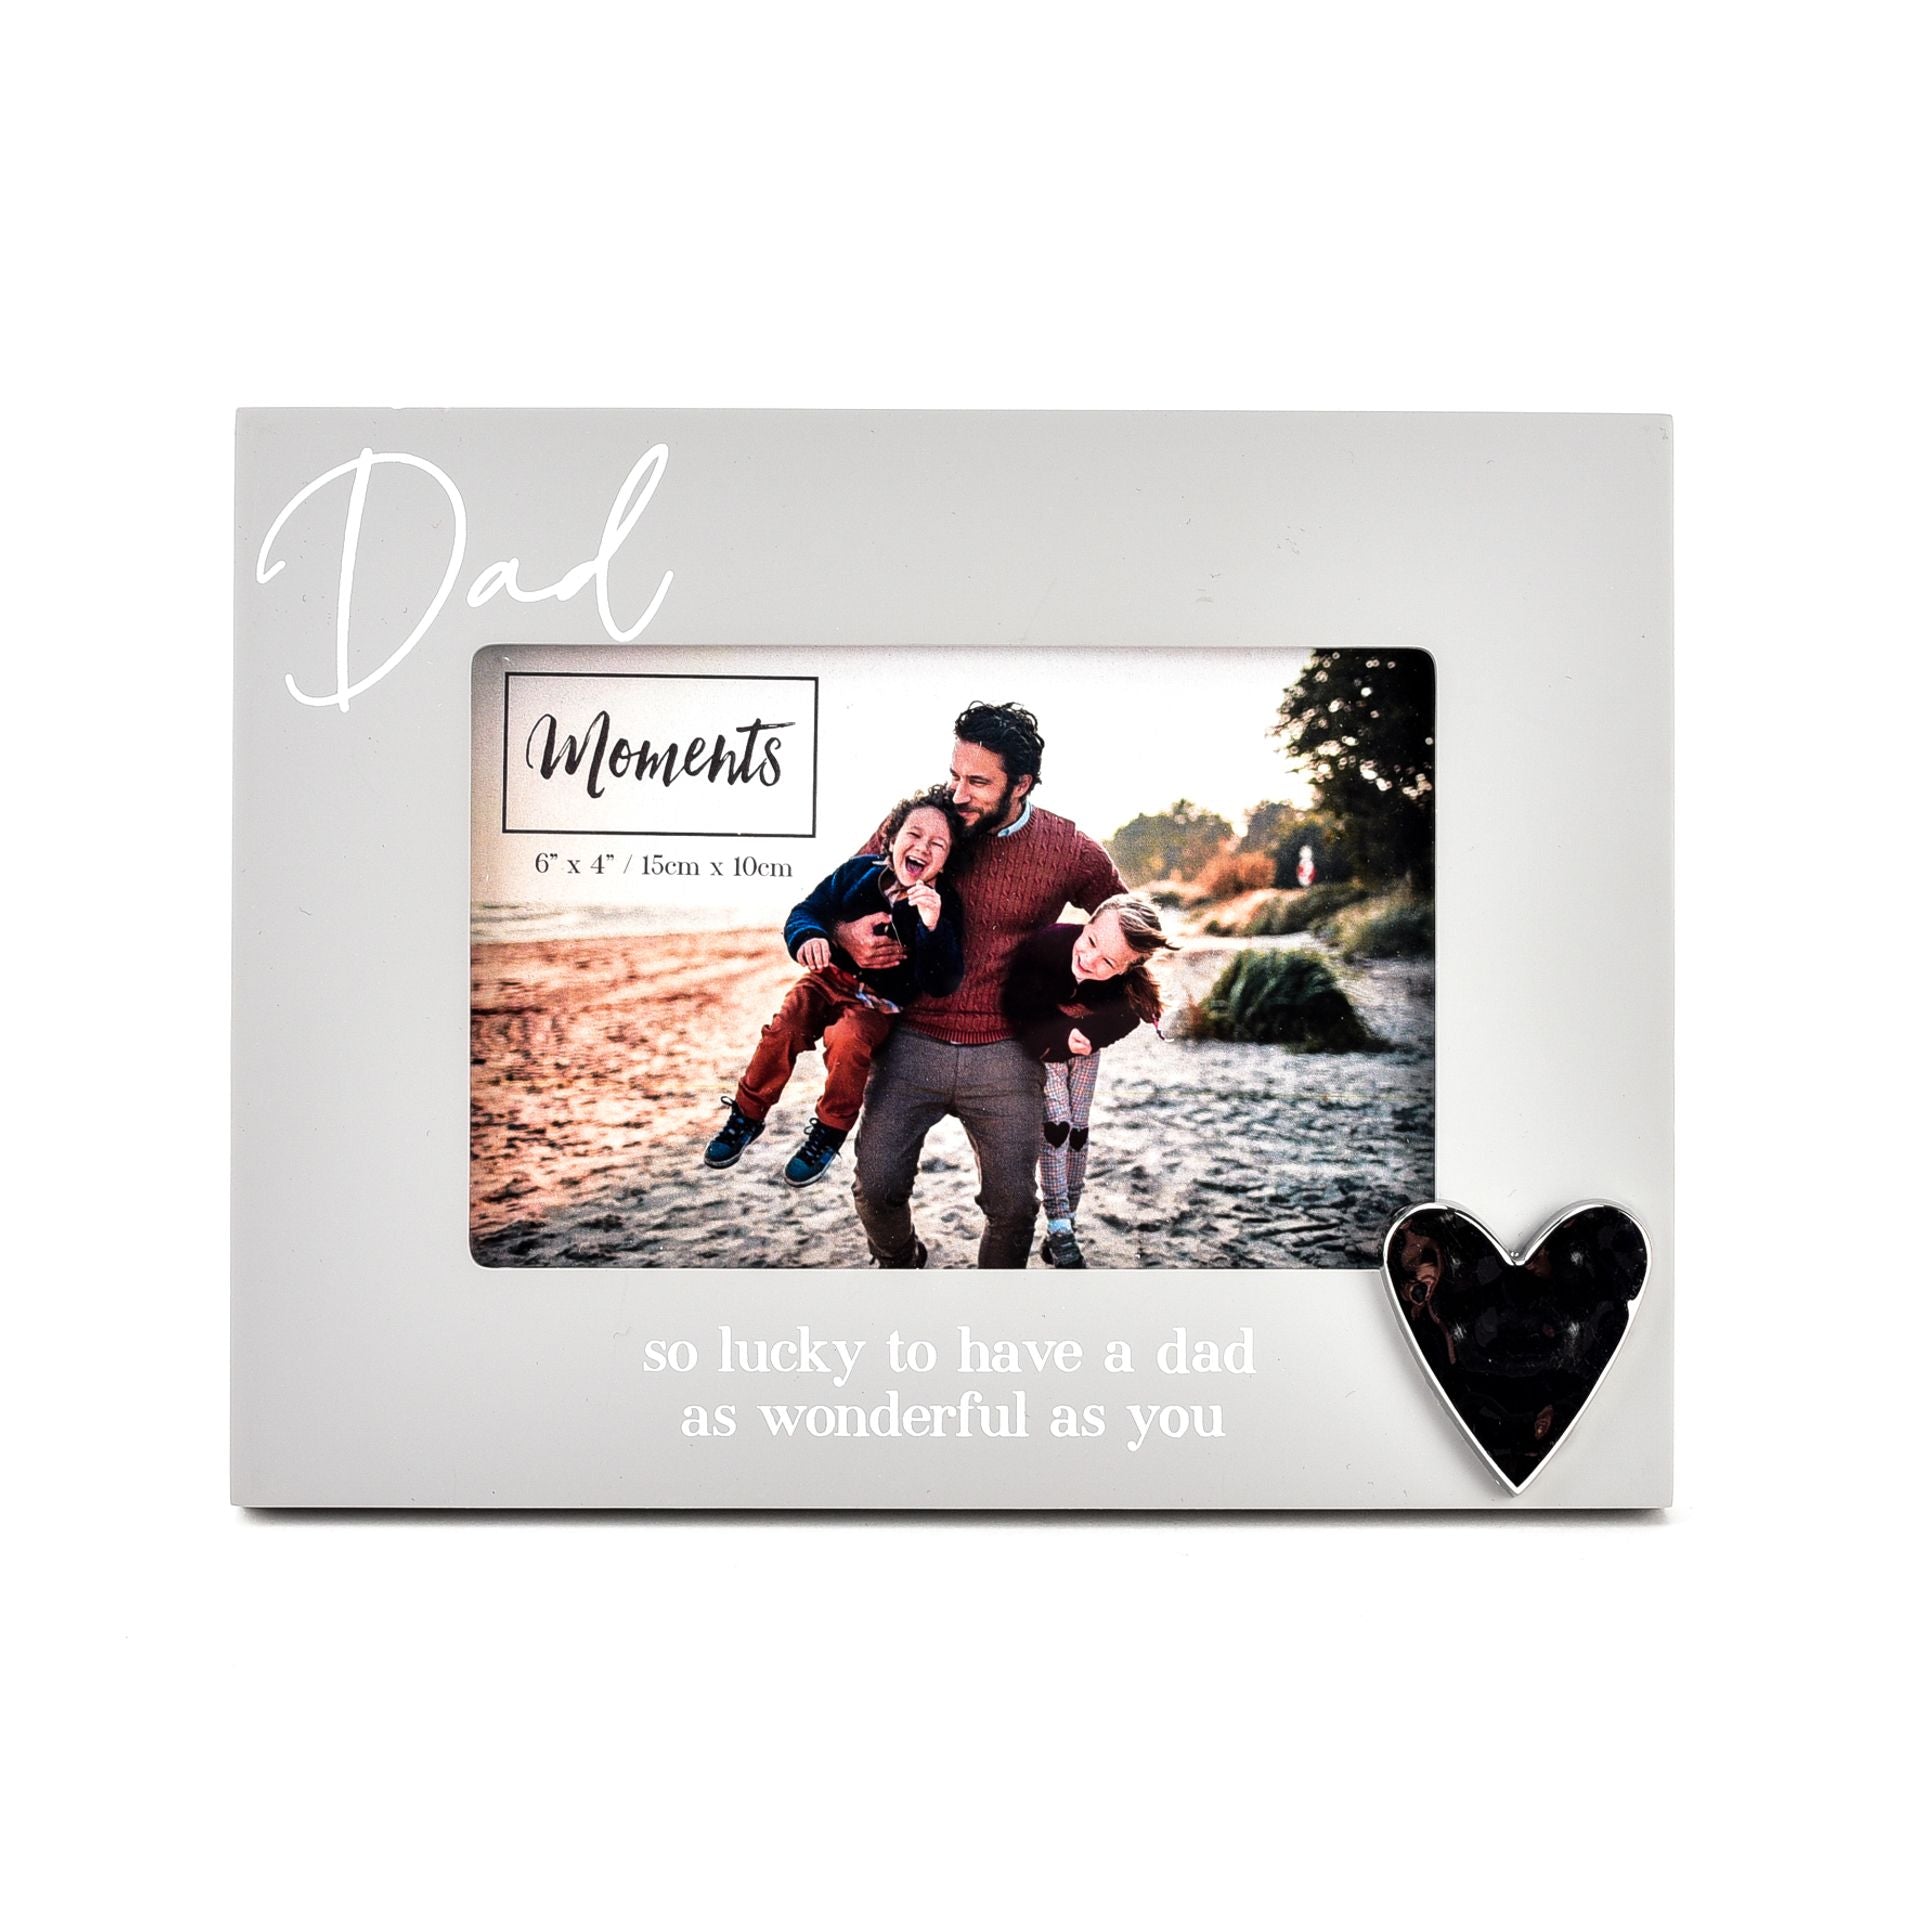 This photo frame is a great way to show your dad how much you love and appreciate him. Featuring a single aperture, this frame is perfect for showcasing an important photo with a sweet sentiment.